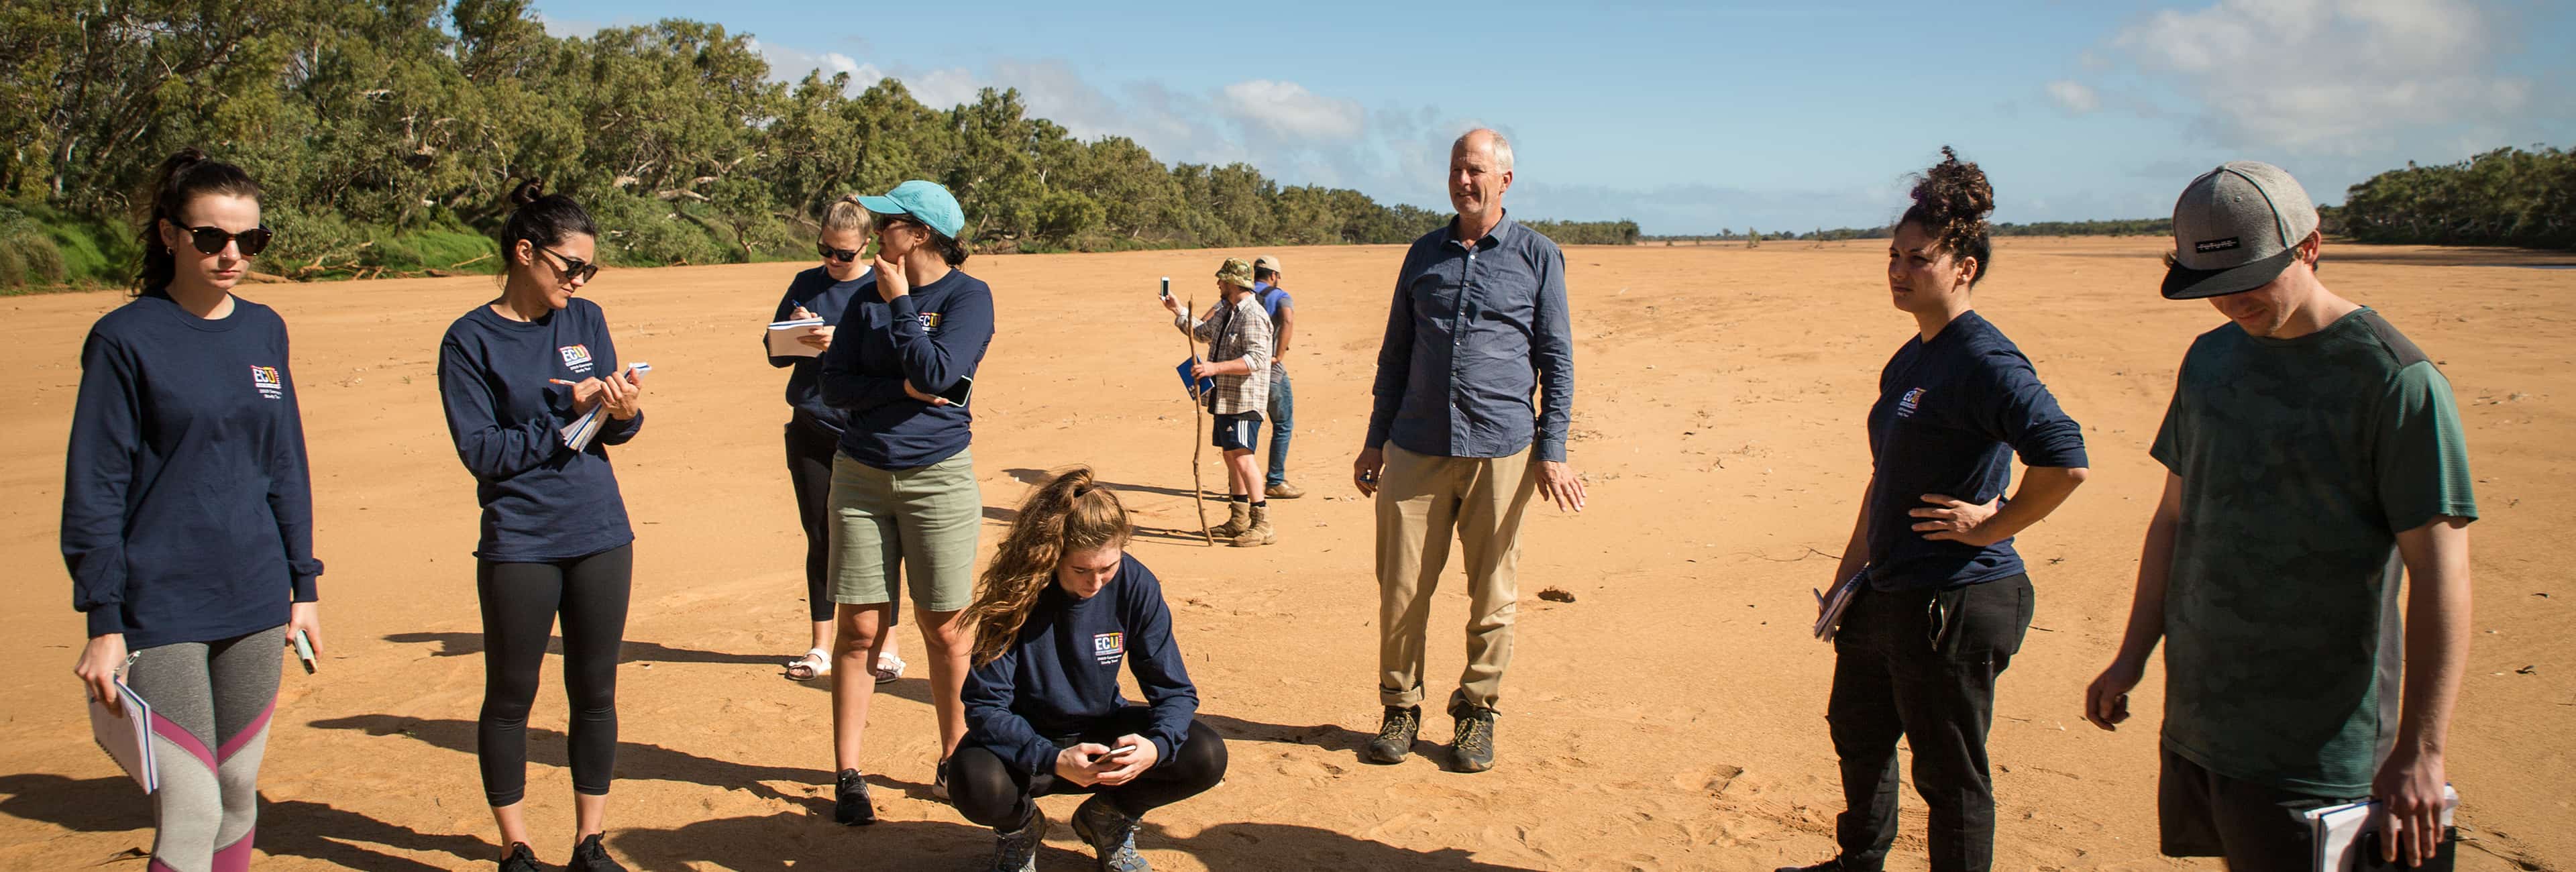 Students and lecturer standing on sandy ground in Canarvon